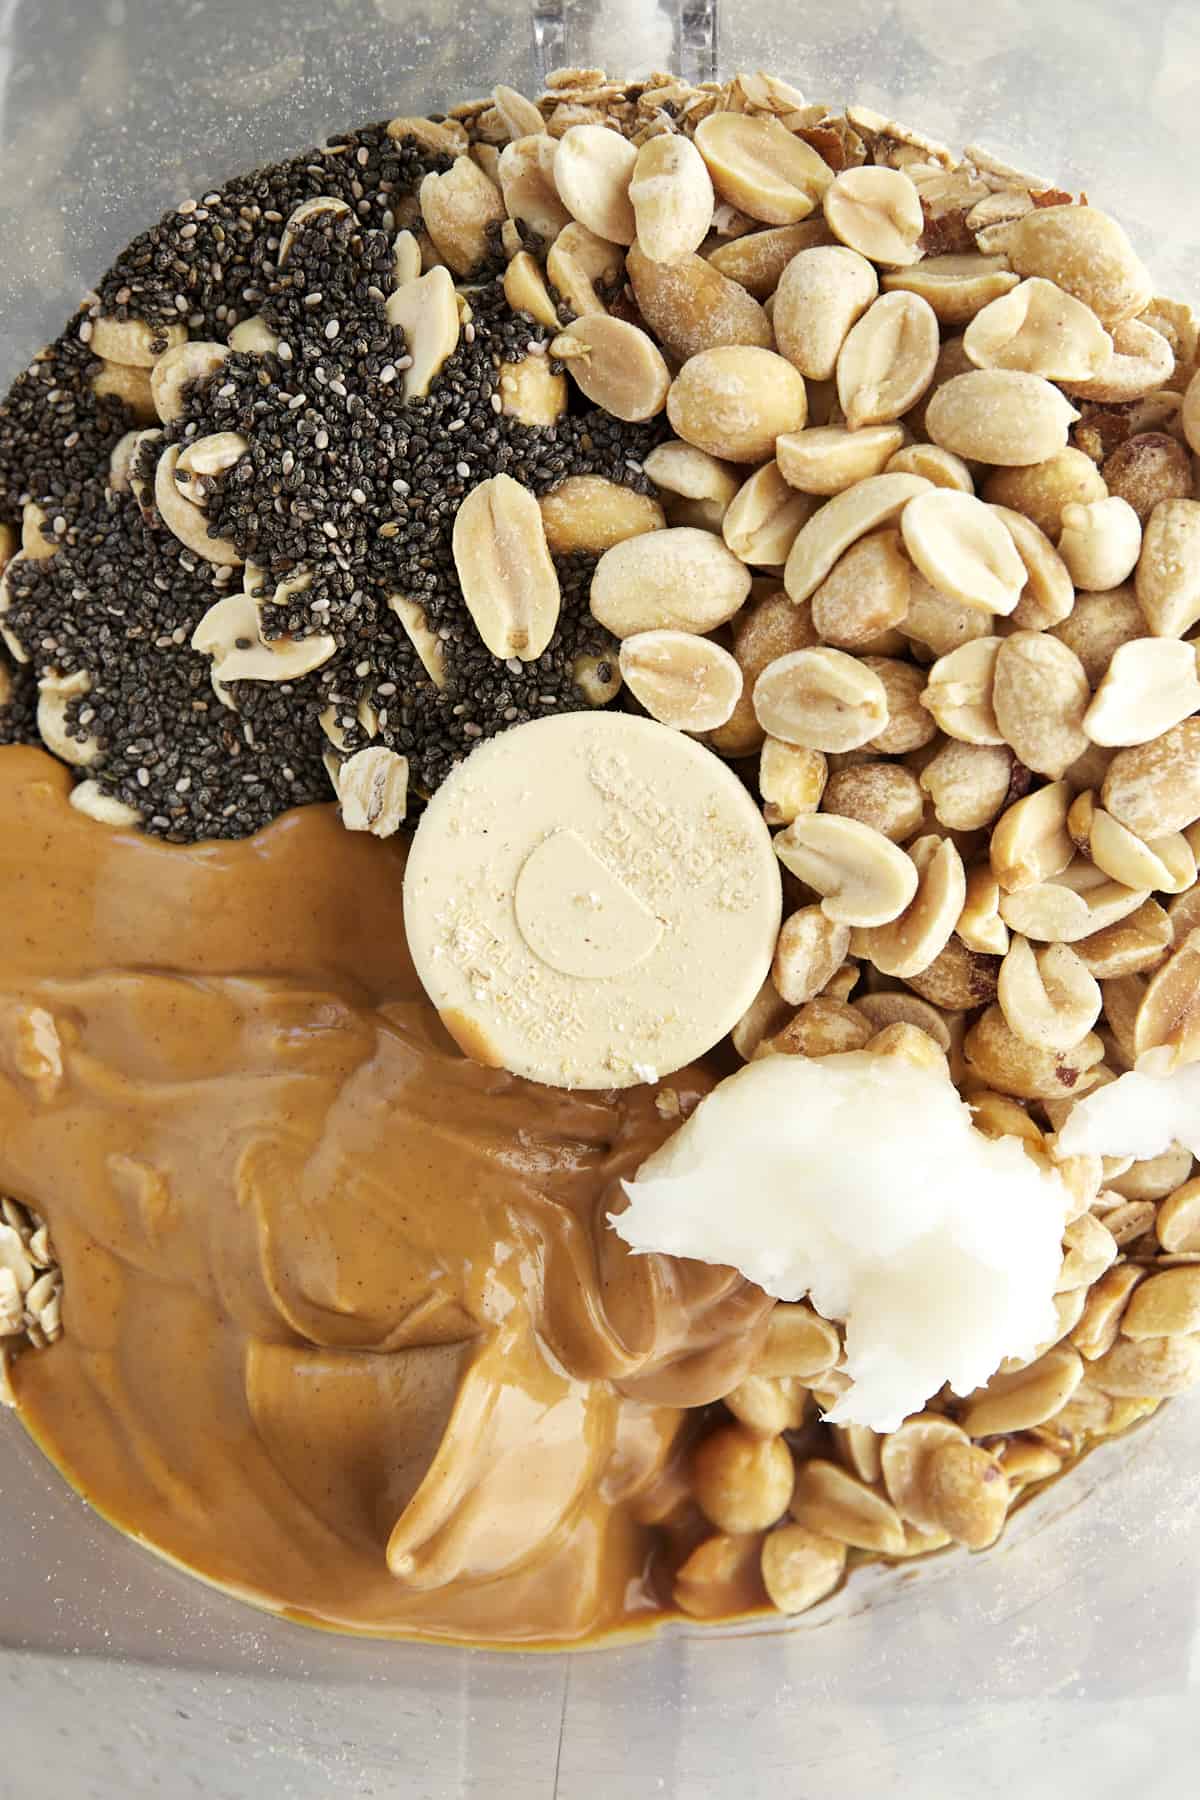 Peanuts, chia seeds, peanut butter, and coconut oil in a food processor.